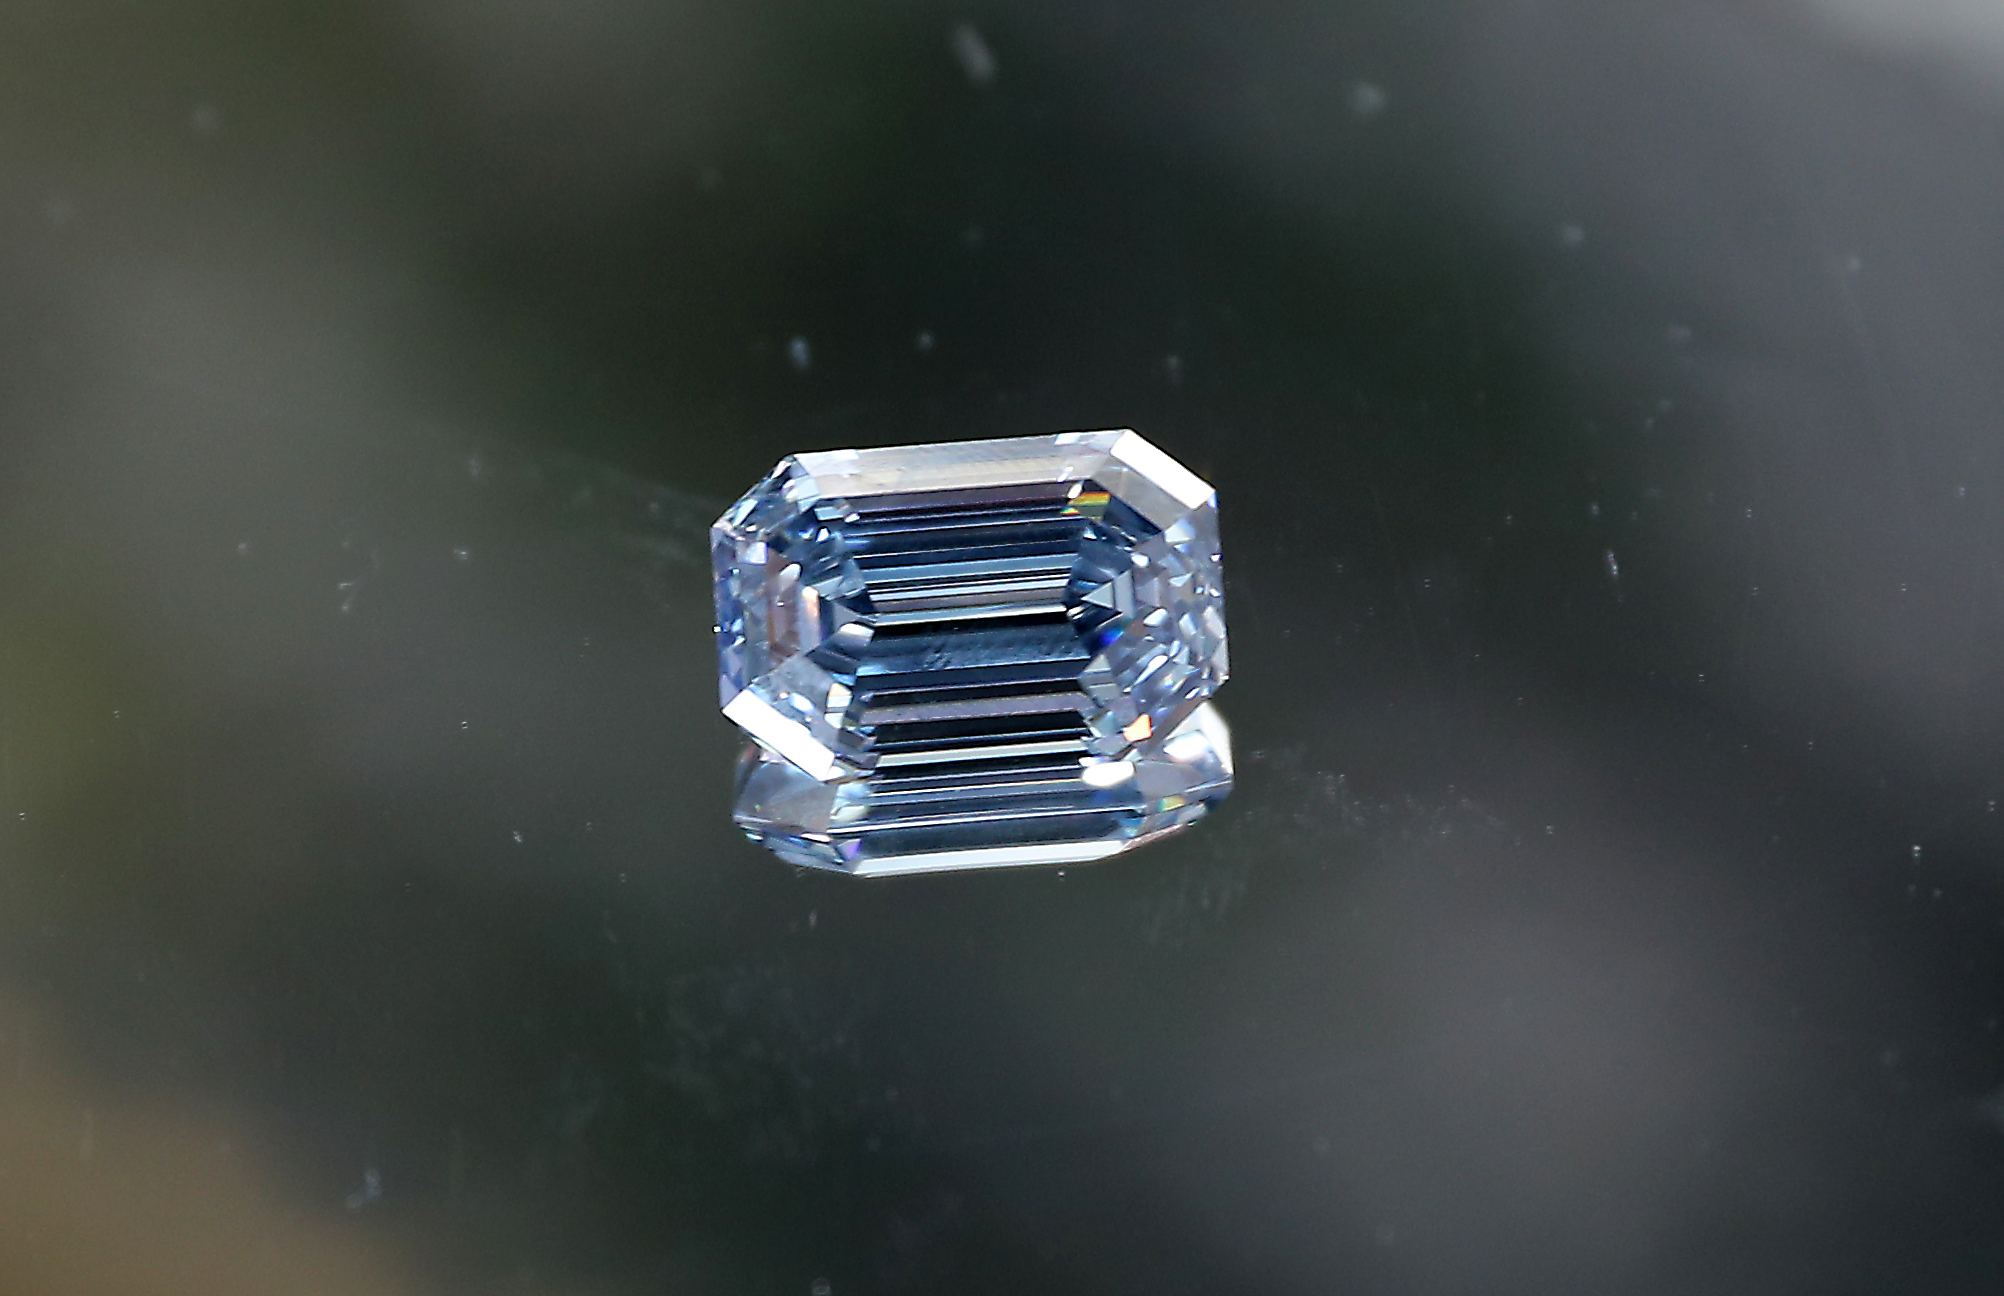 De Beers and Diacore purchase an exceptional 40 carat blue diamond